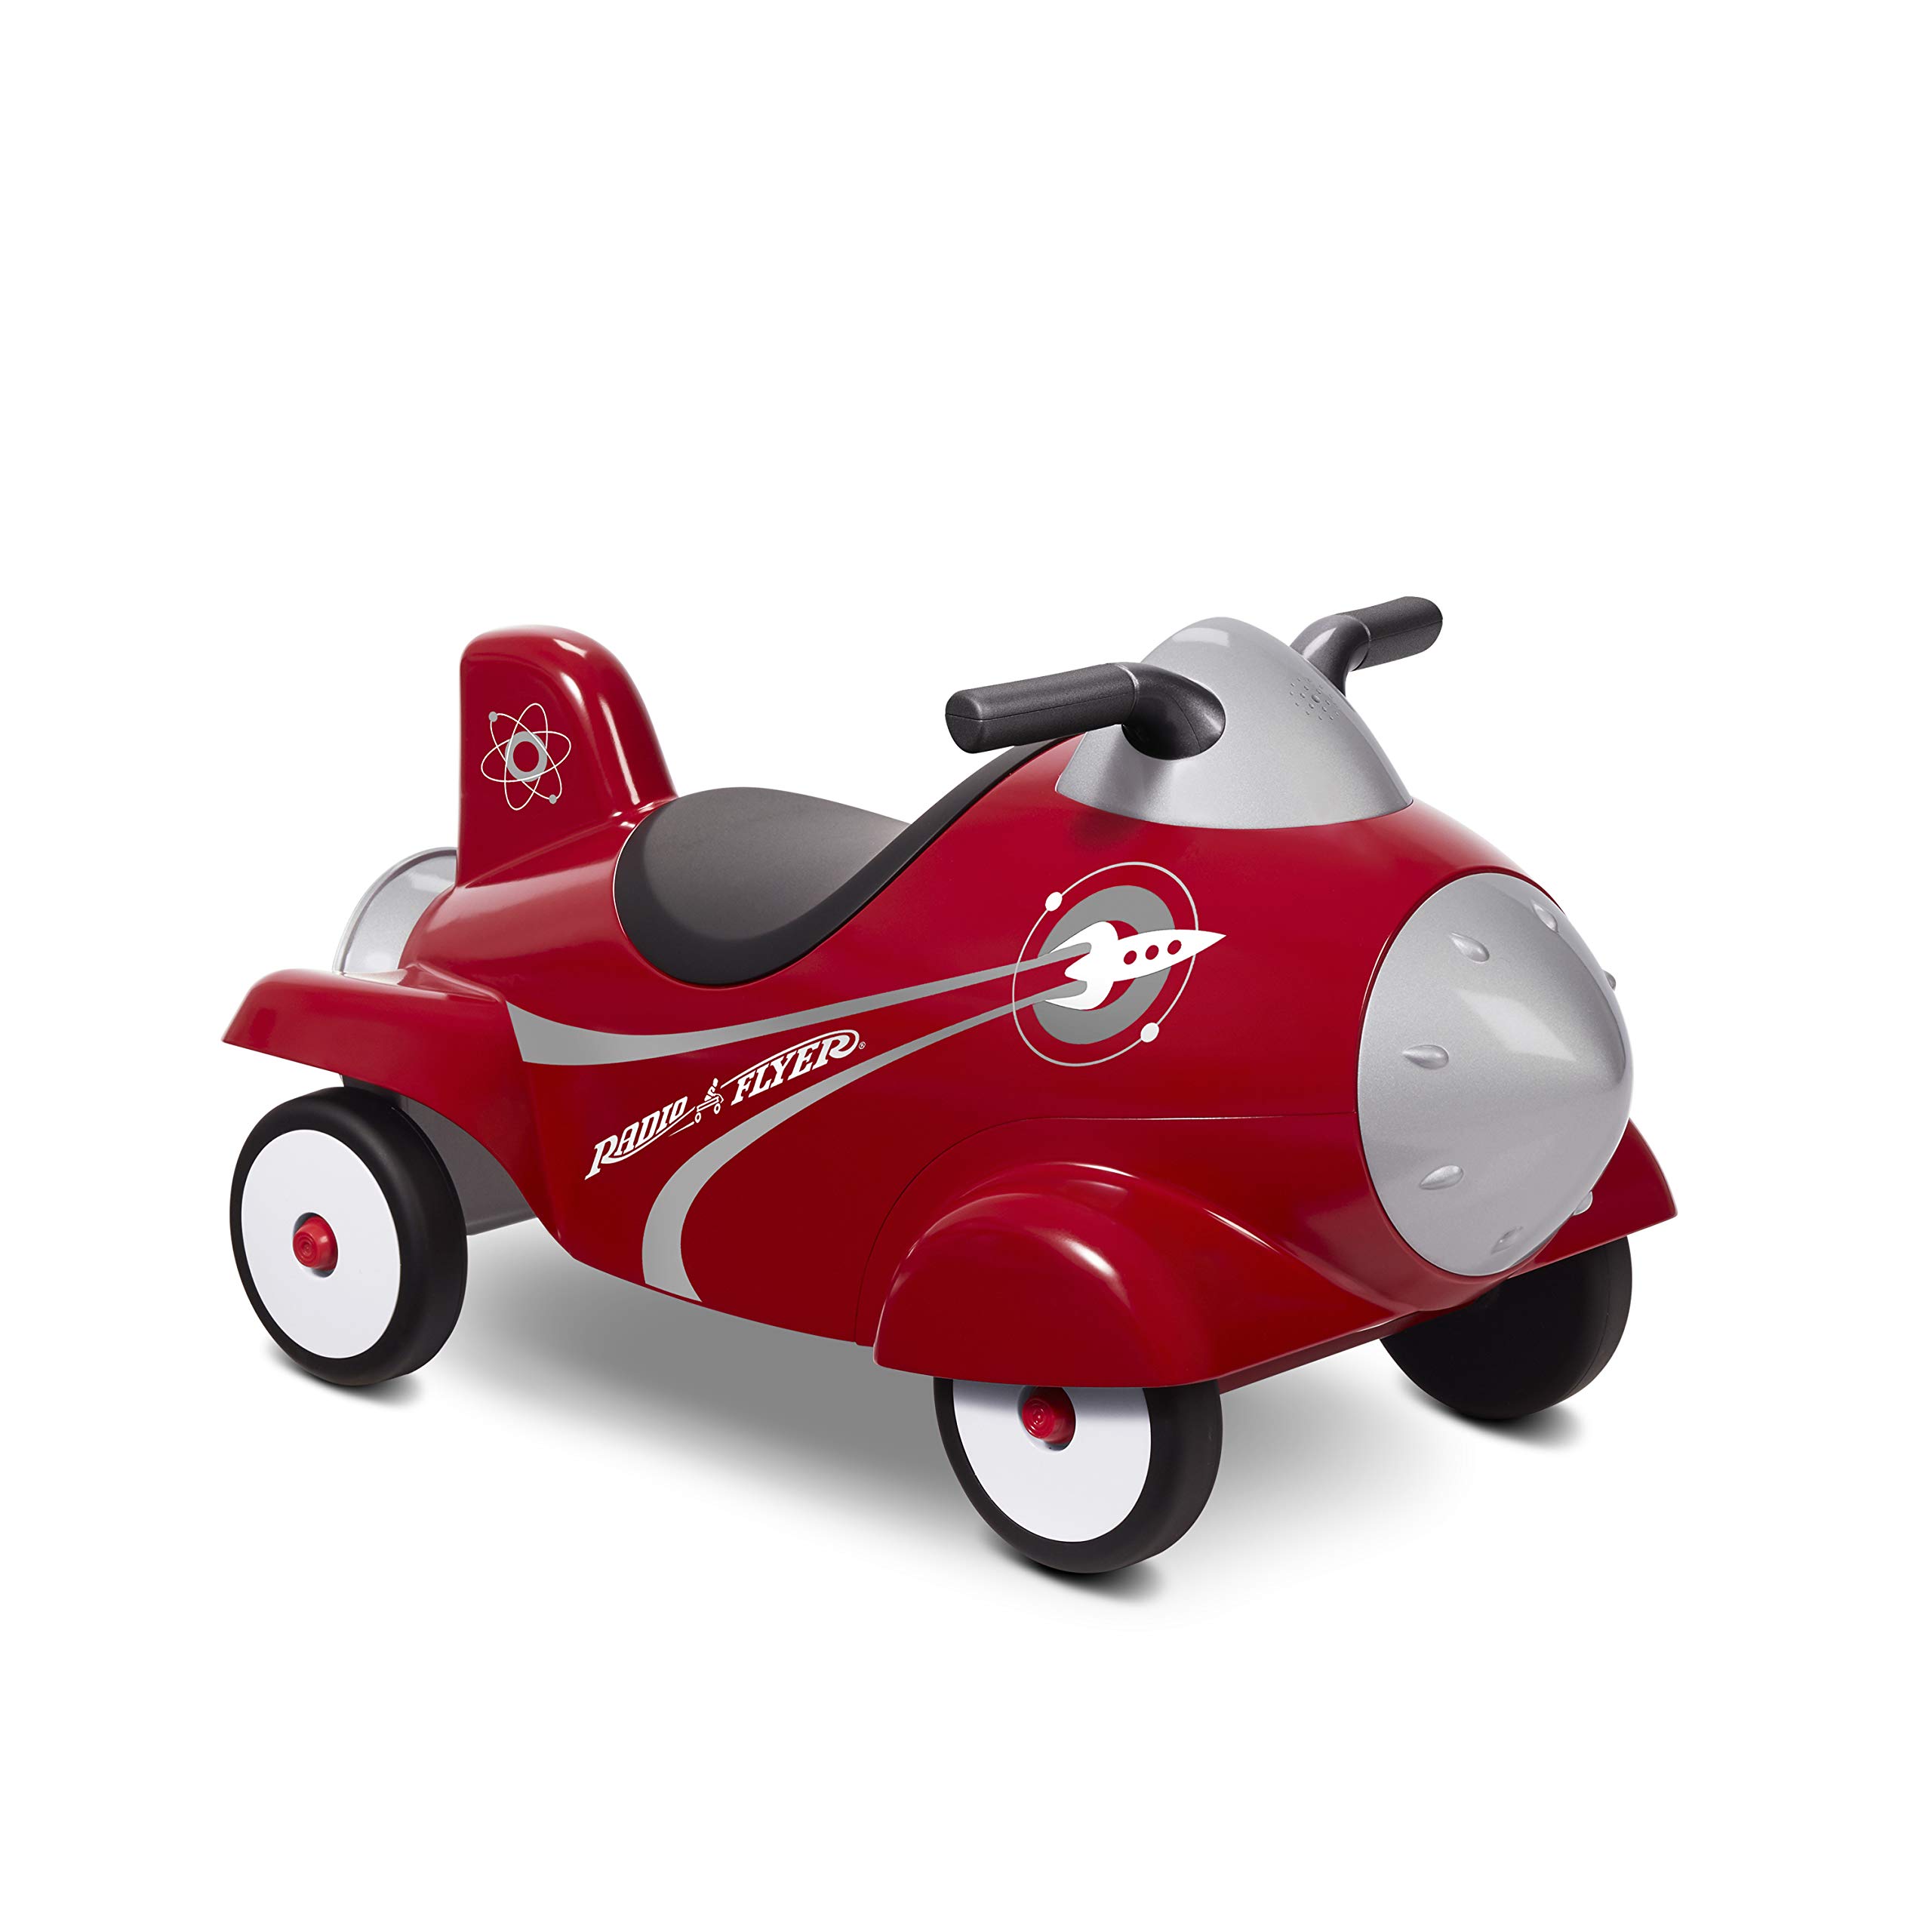 Radio Flyer Retro Rocket Foot-to-Floor Ride-On w/ Lights & Sounds $30 + Free Shipping w/ Prime or on $35+